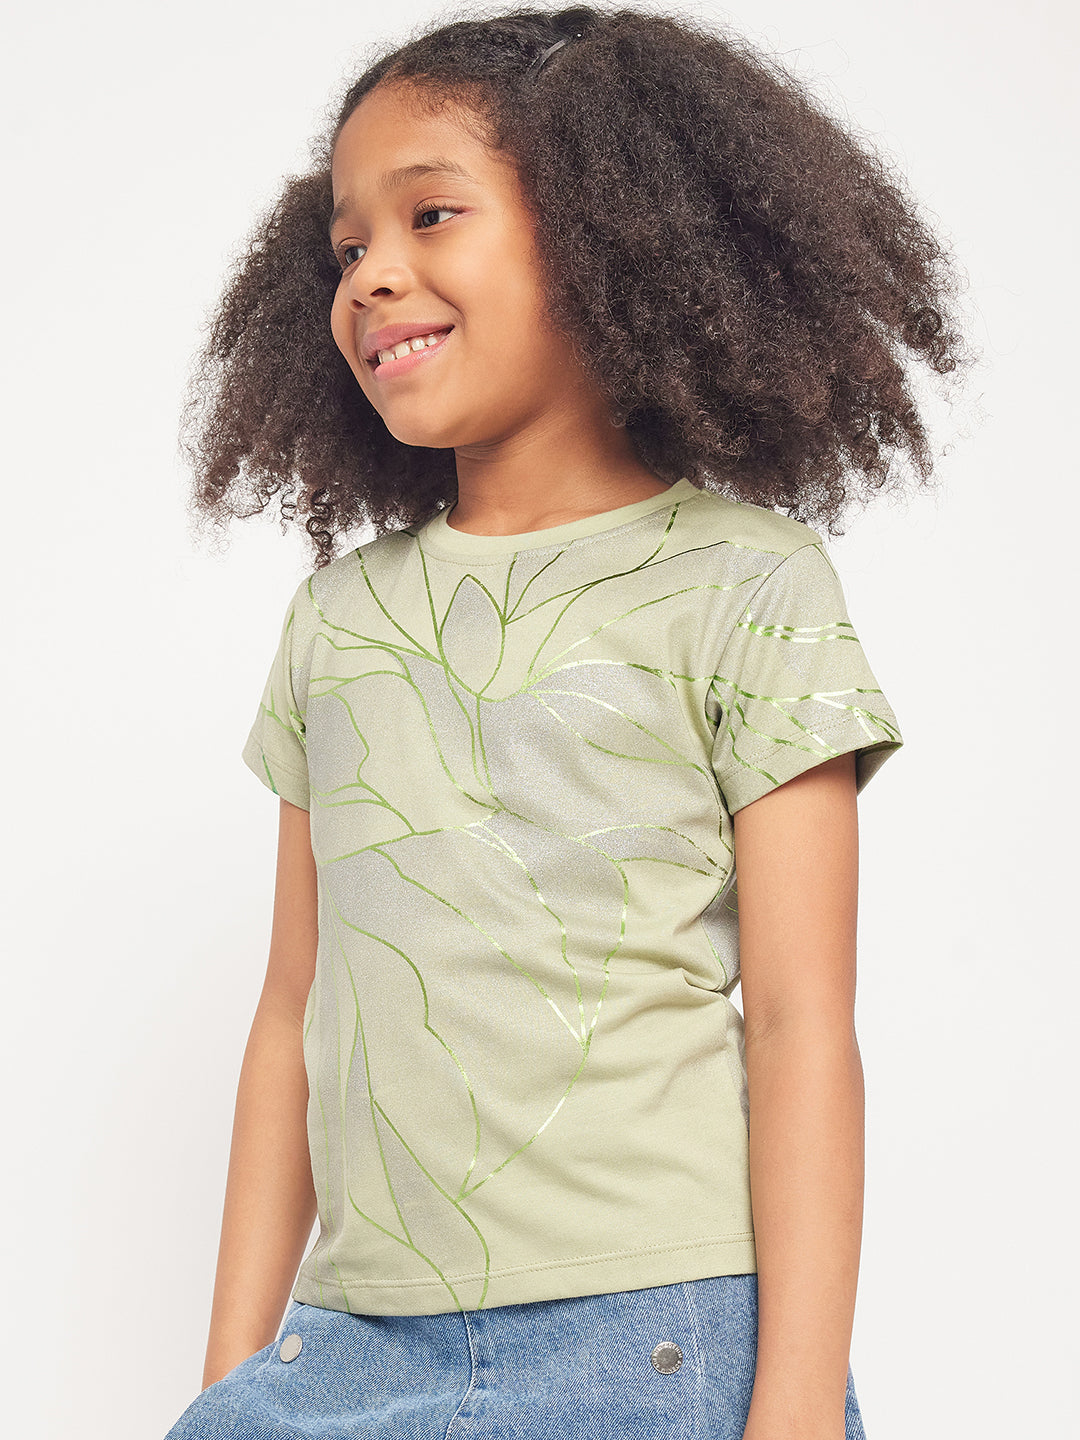 Pampolina Girls Allover Floral Printed Half Sleeve Top-Green